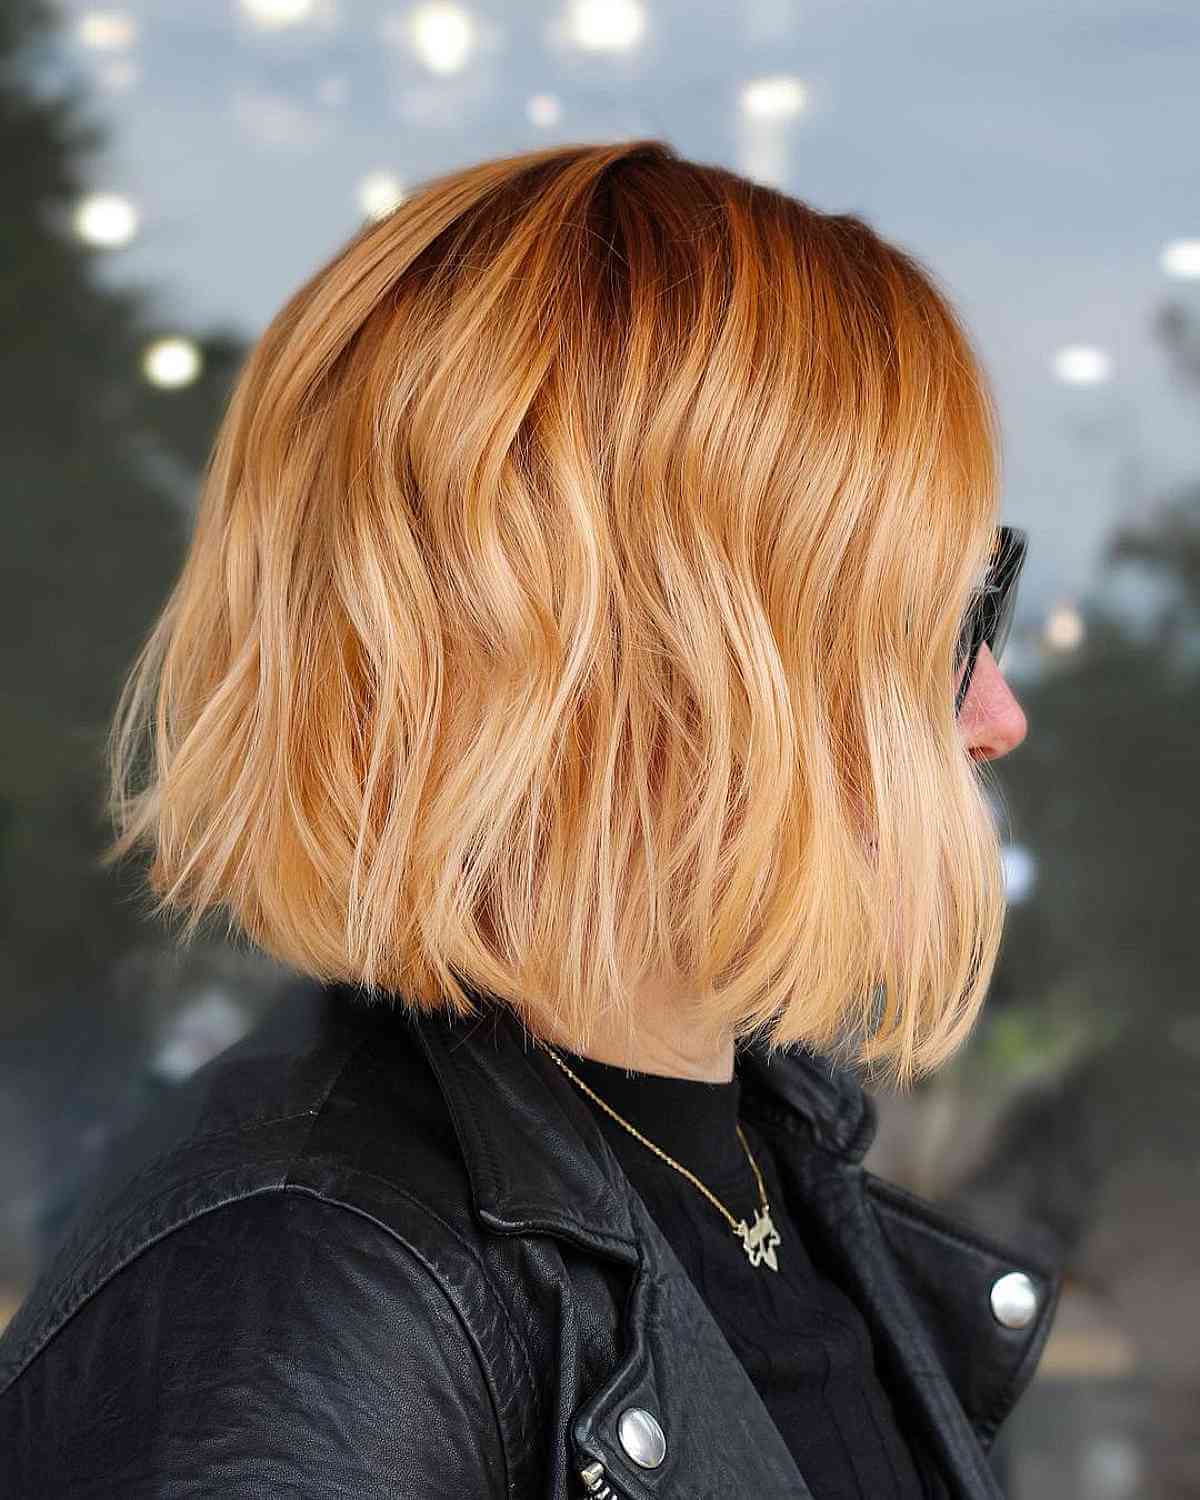 Strawberry blonde ombre hairstyle